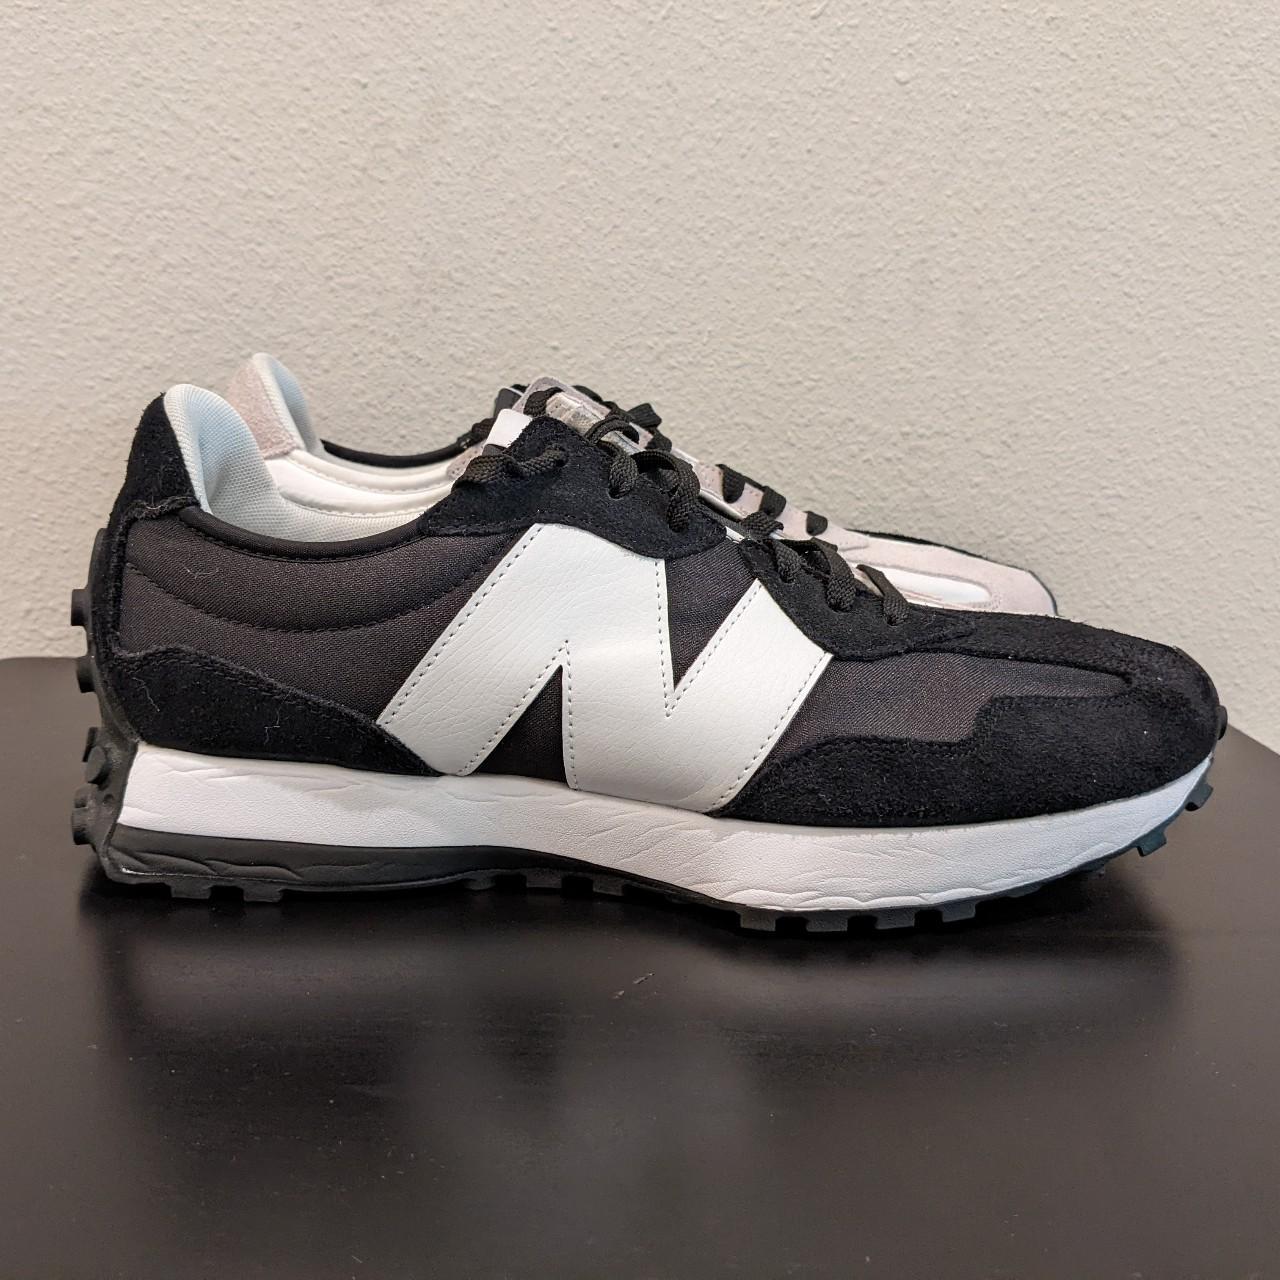 New Balance Men's Black and White Trainers | Depop